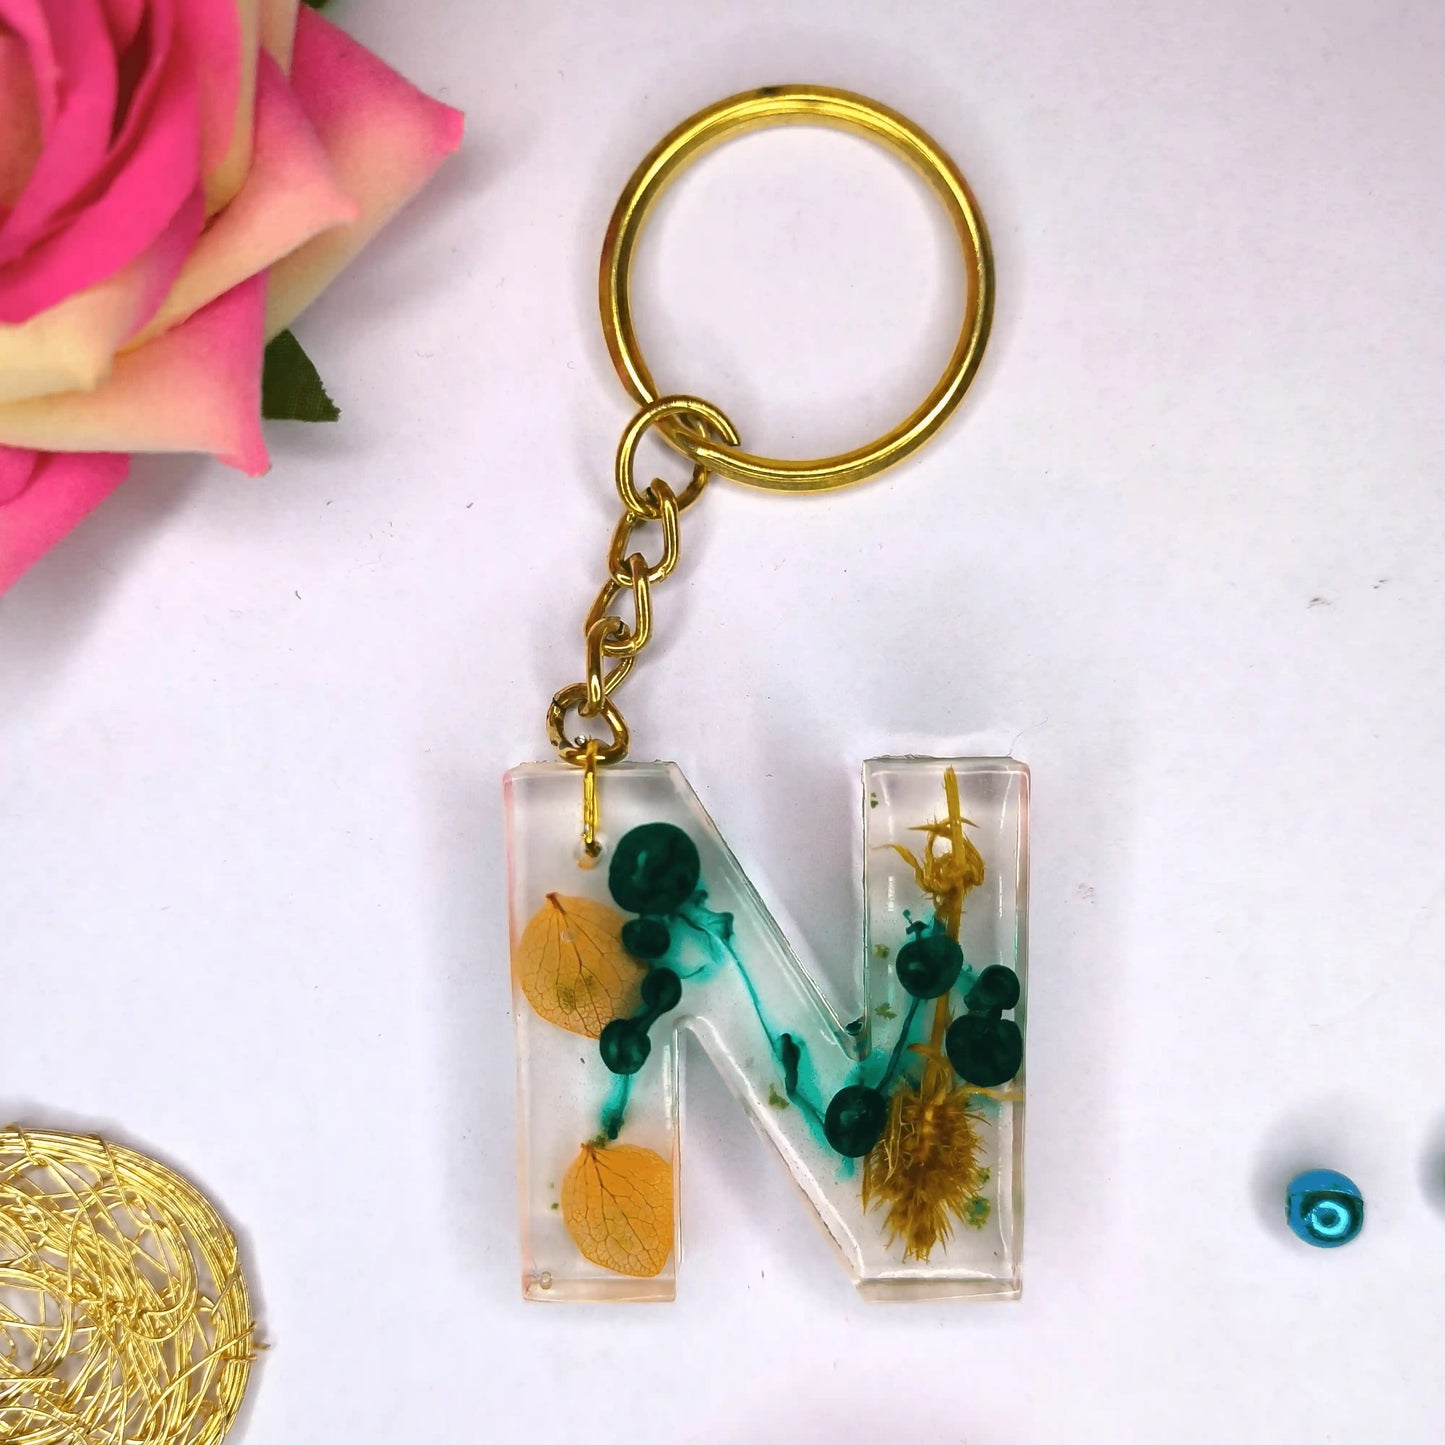 Get Modern Preserved Flowers Resin Keychains With Customizable Monogram For Men and Women